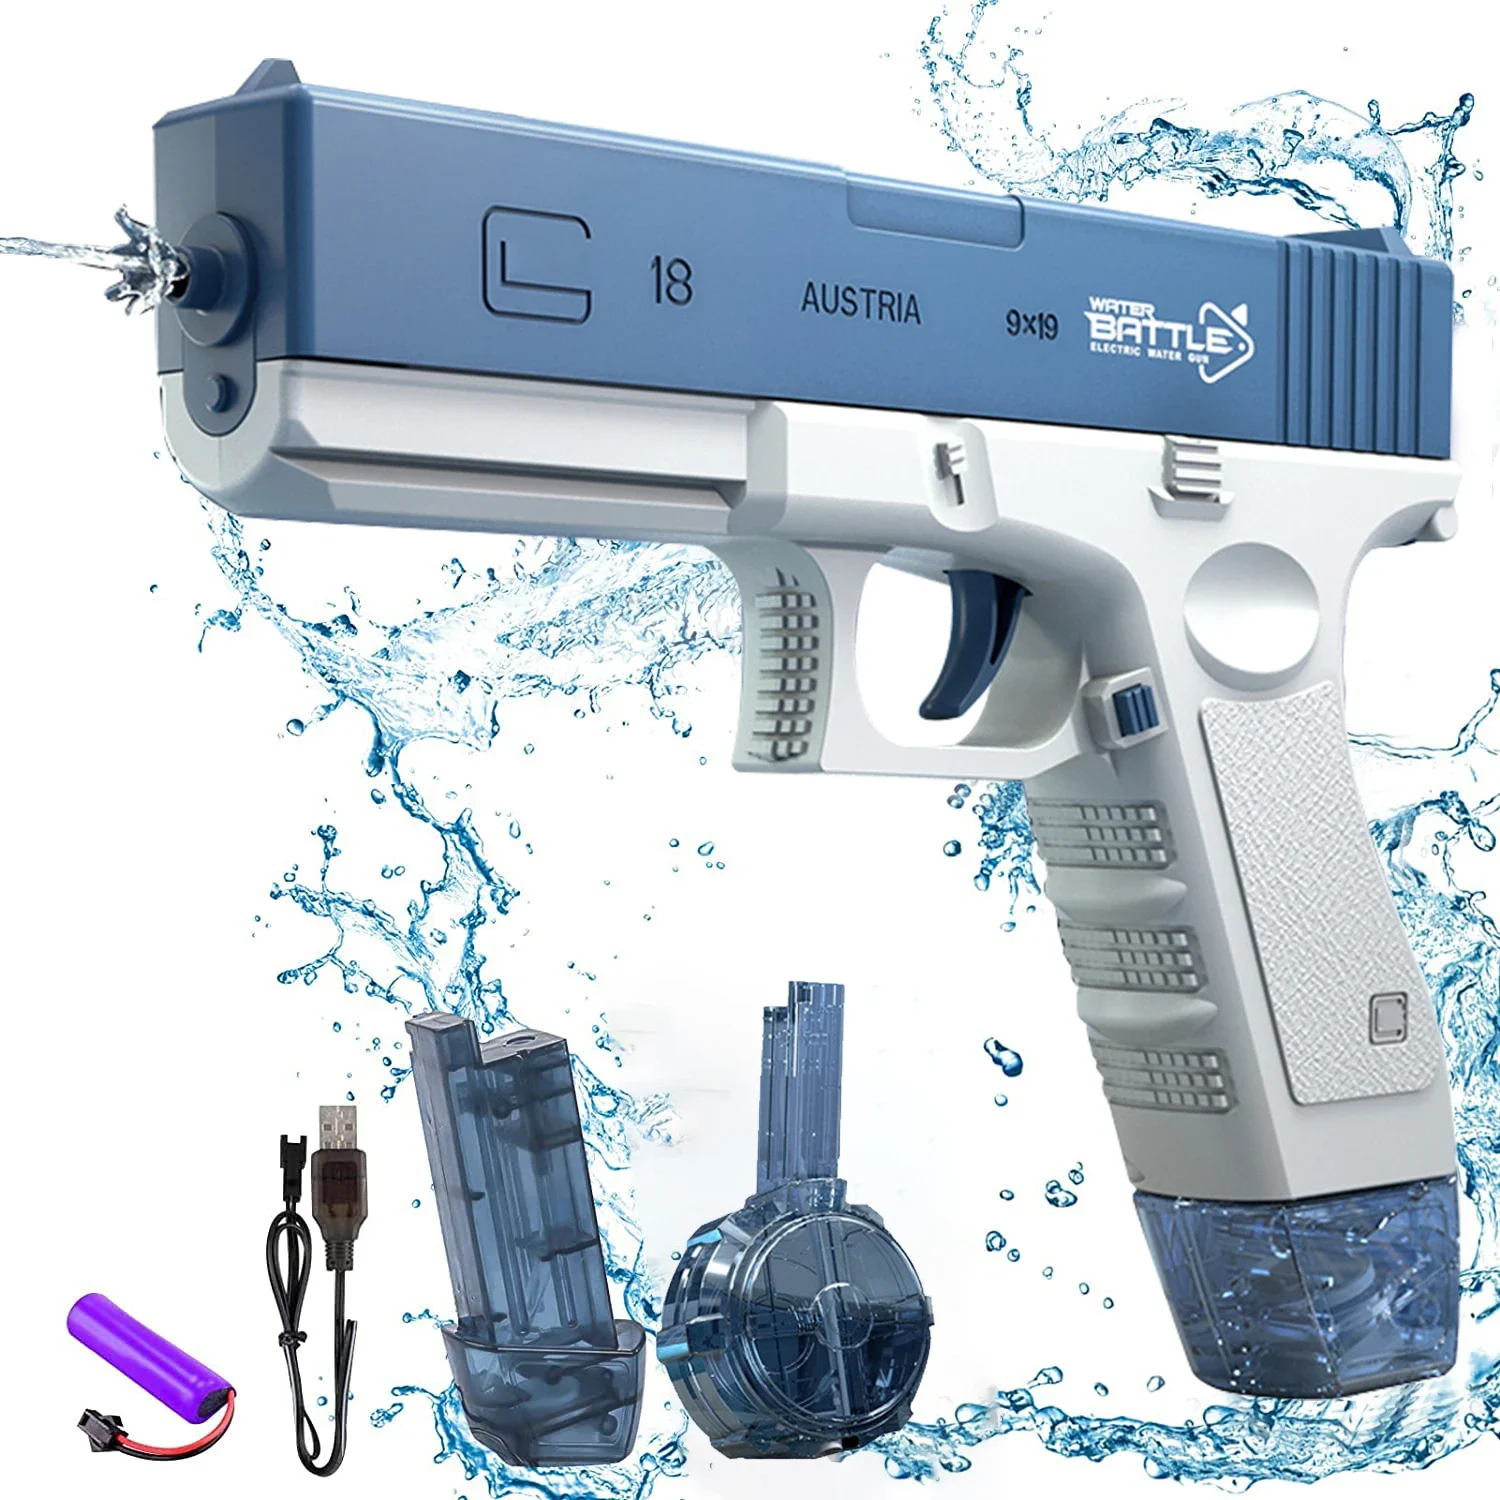 

Electric Water Storage Gun Pistol Shooting Toy Portable Children Summer Beach Outdoor Fight Fantasy Toys for Boys Kids Game